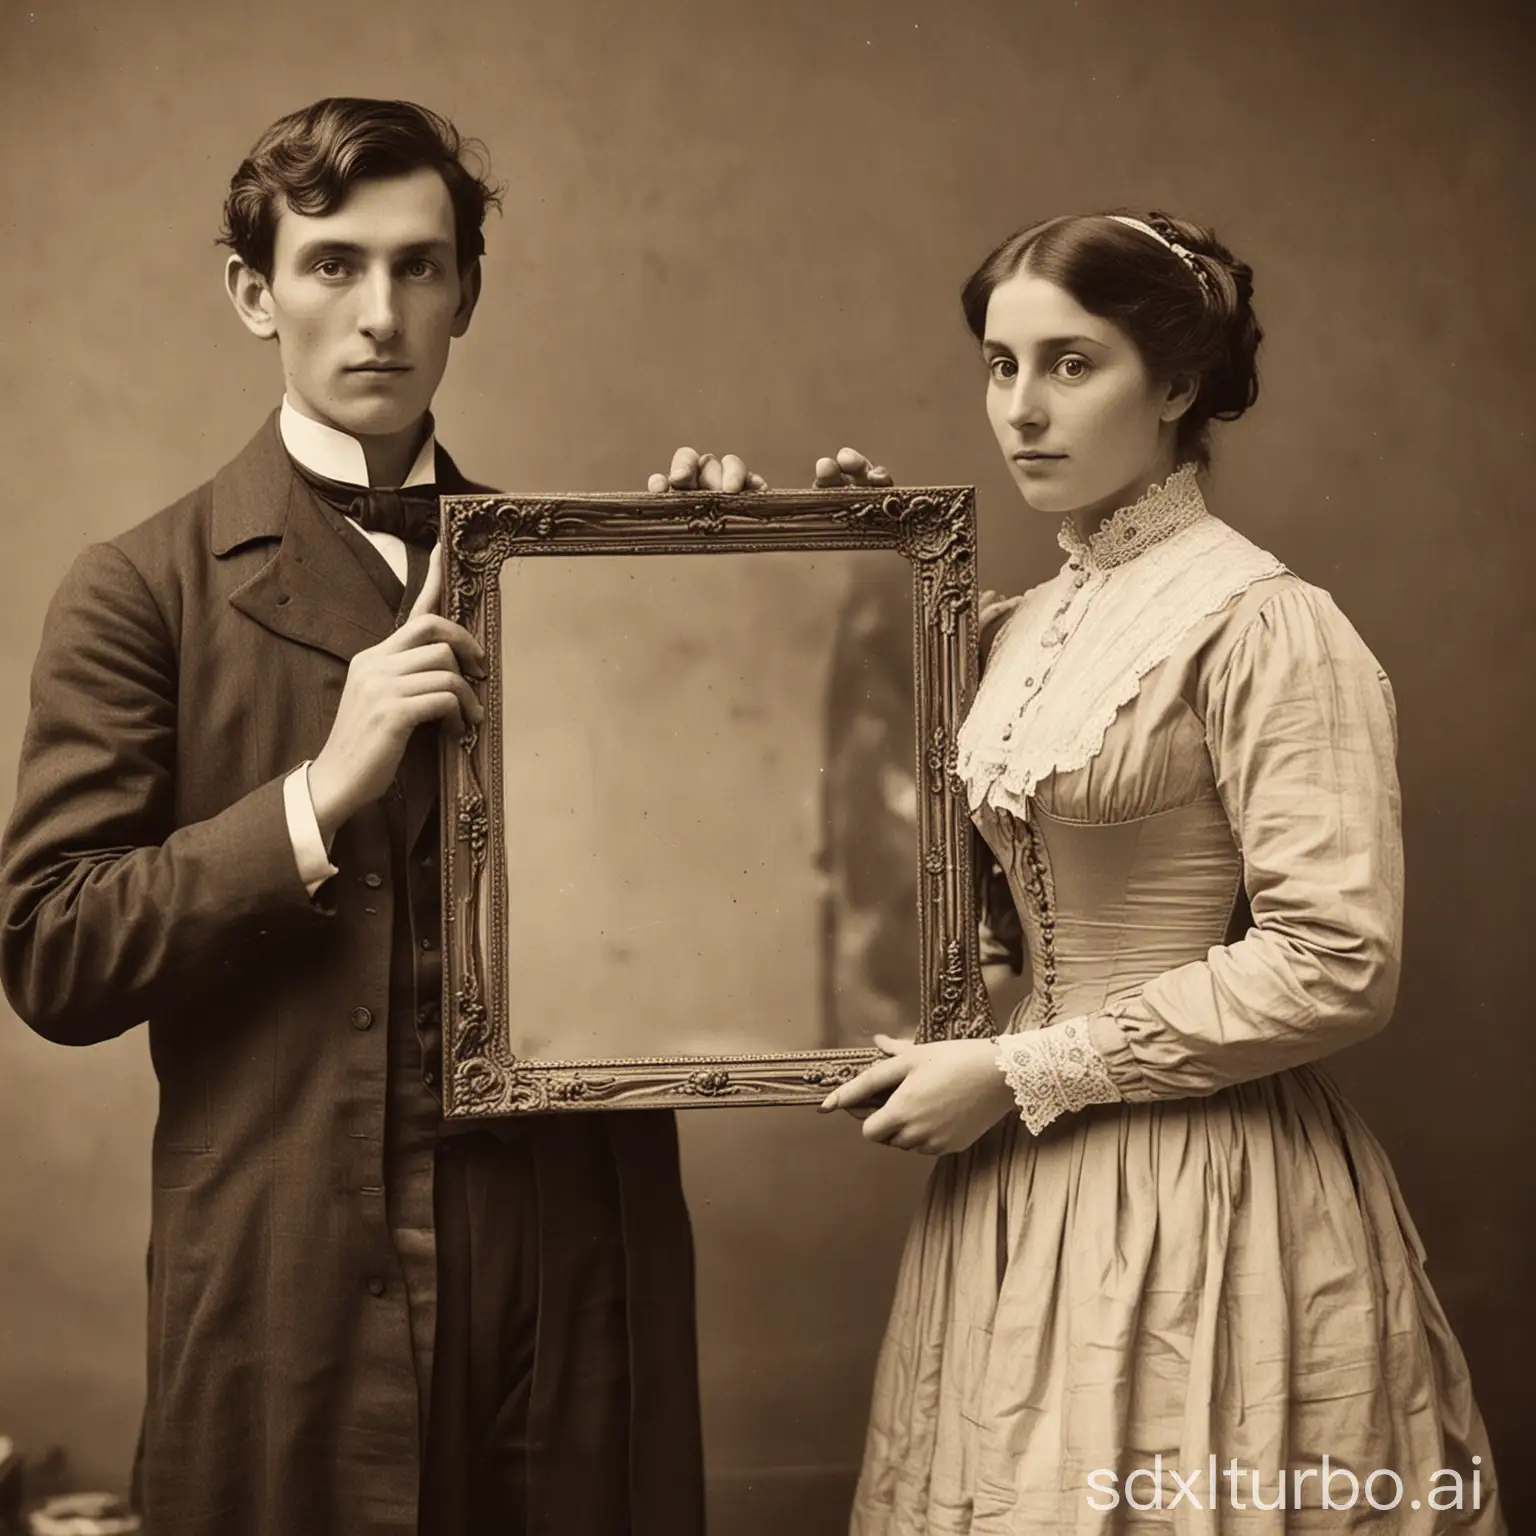 19th century photograph of two people holding a mirror in their hands